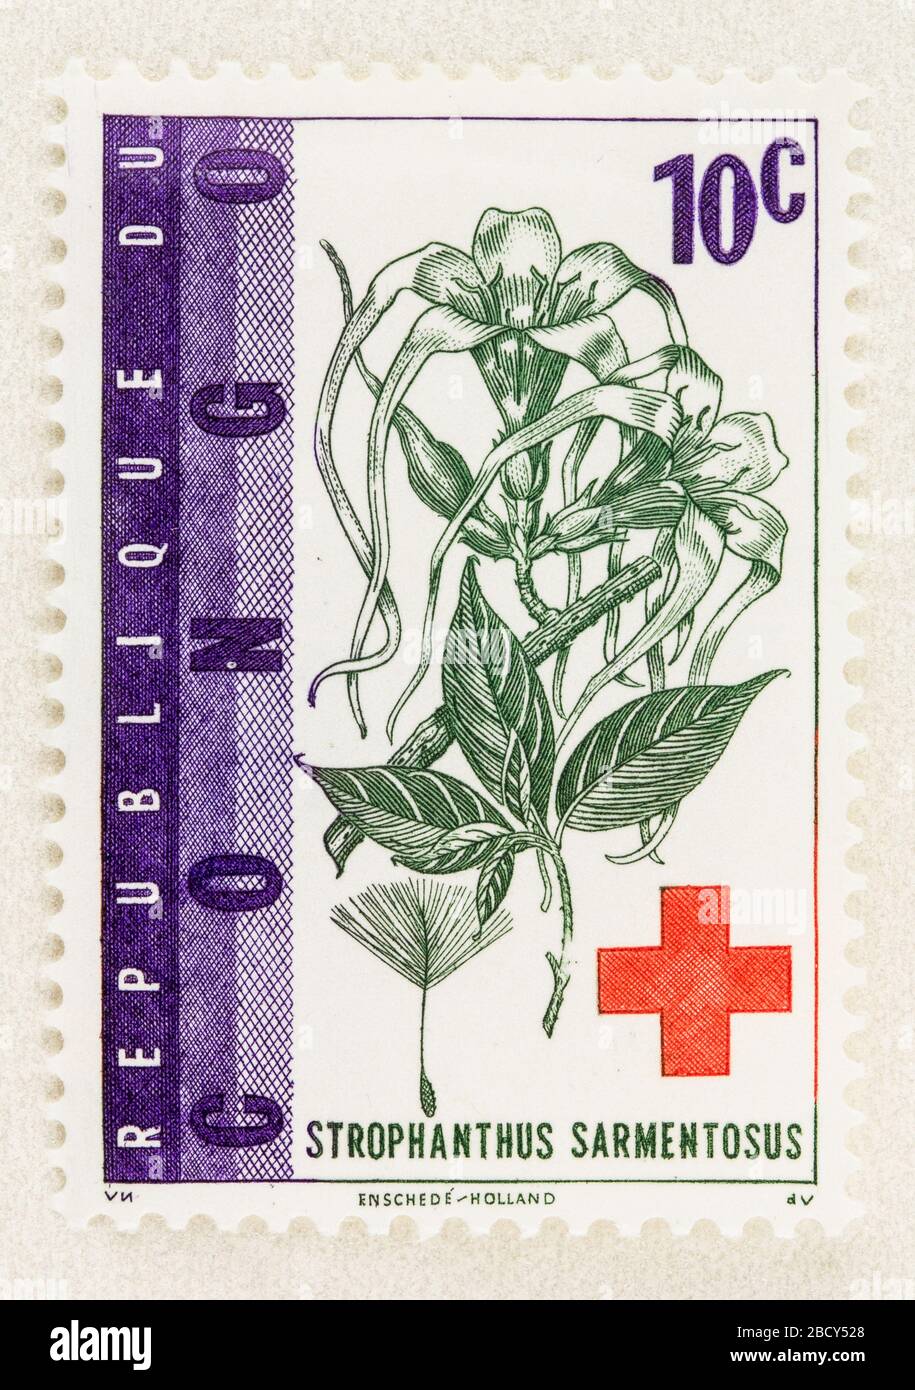 SEATTLE WASHINGTON - April 3, 2020: Close up of Congo stamp with medicinal plant  Strophanthus sarmentosus, aka poison arrow vine, and Red Cross. Stock Photo